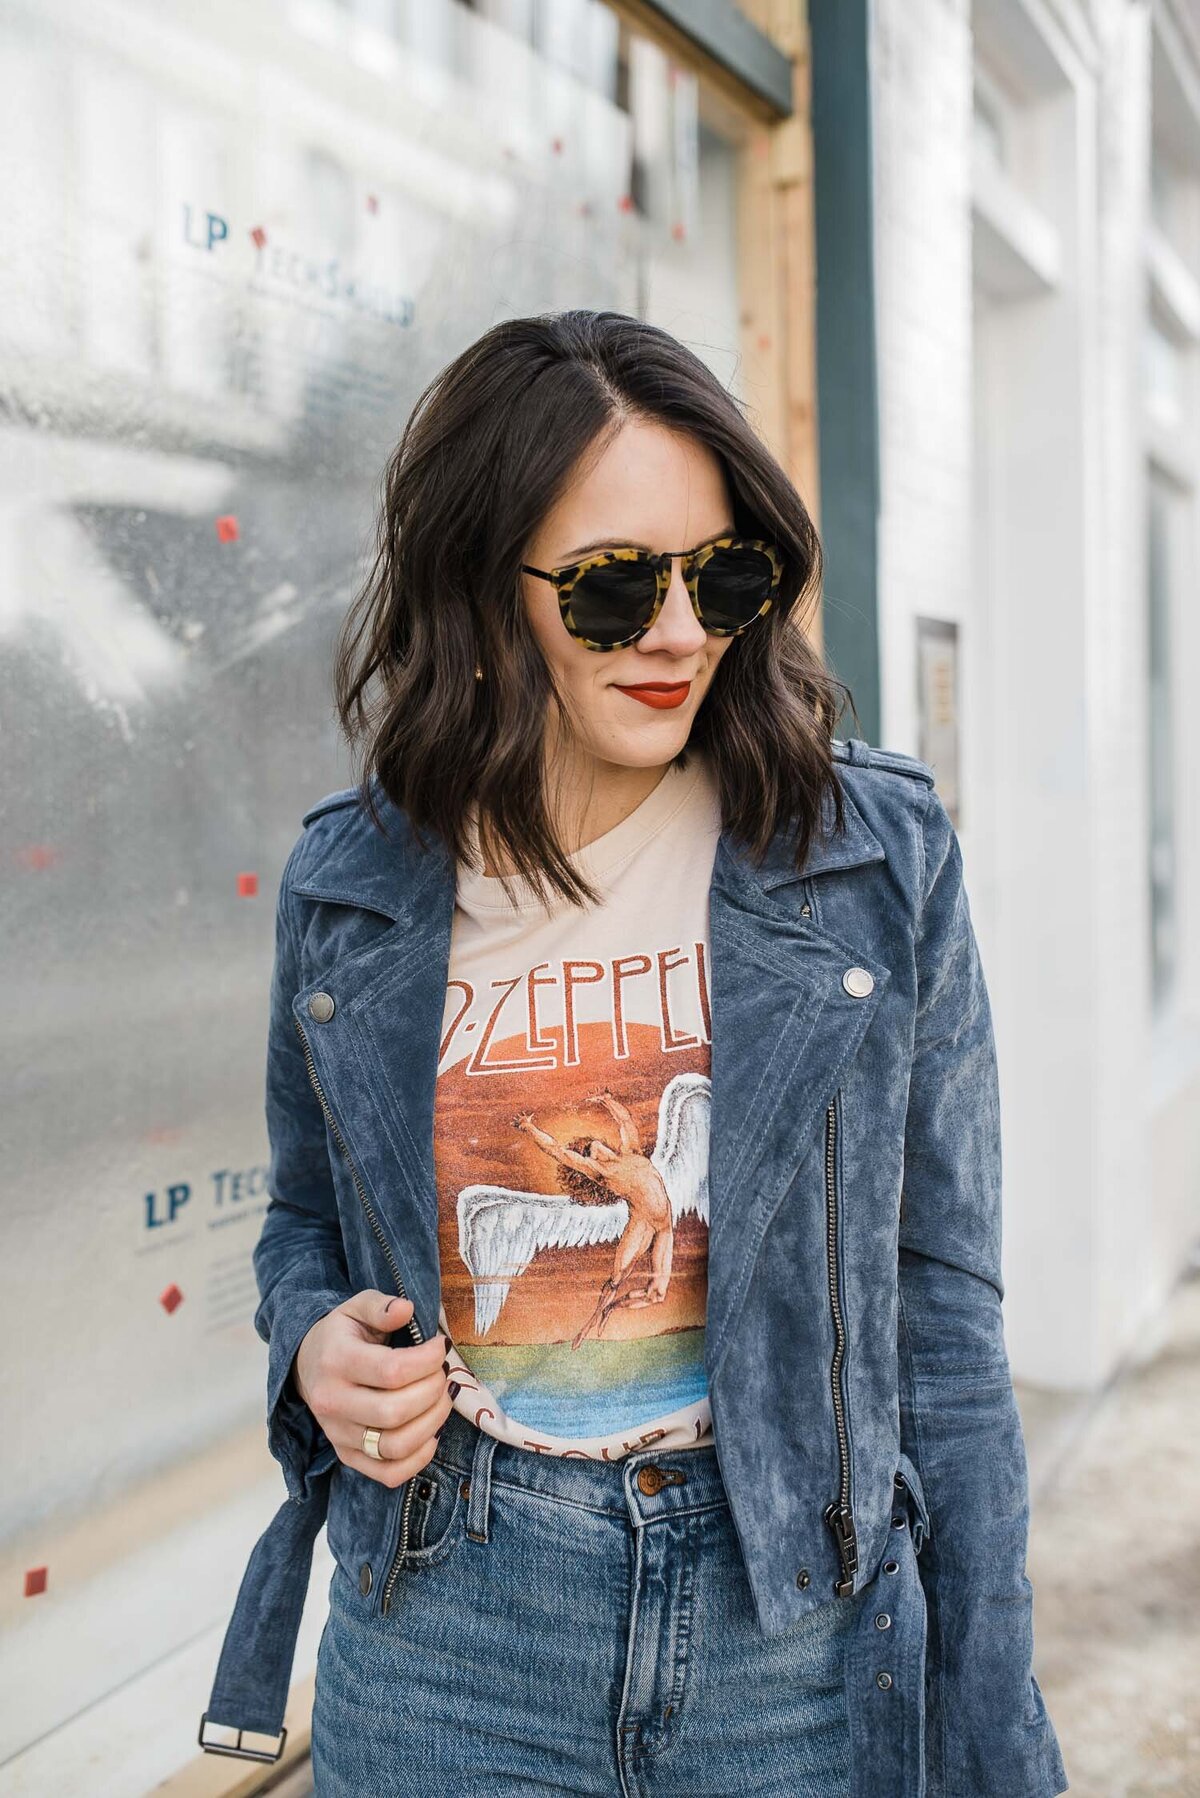 blue-suede-jacket-graphic-tee-vintage-jeans-style-blogger-outfit-ideas-for-date-night-My-Style-VIta-3